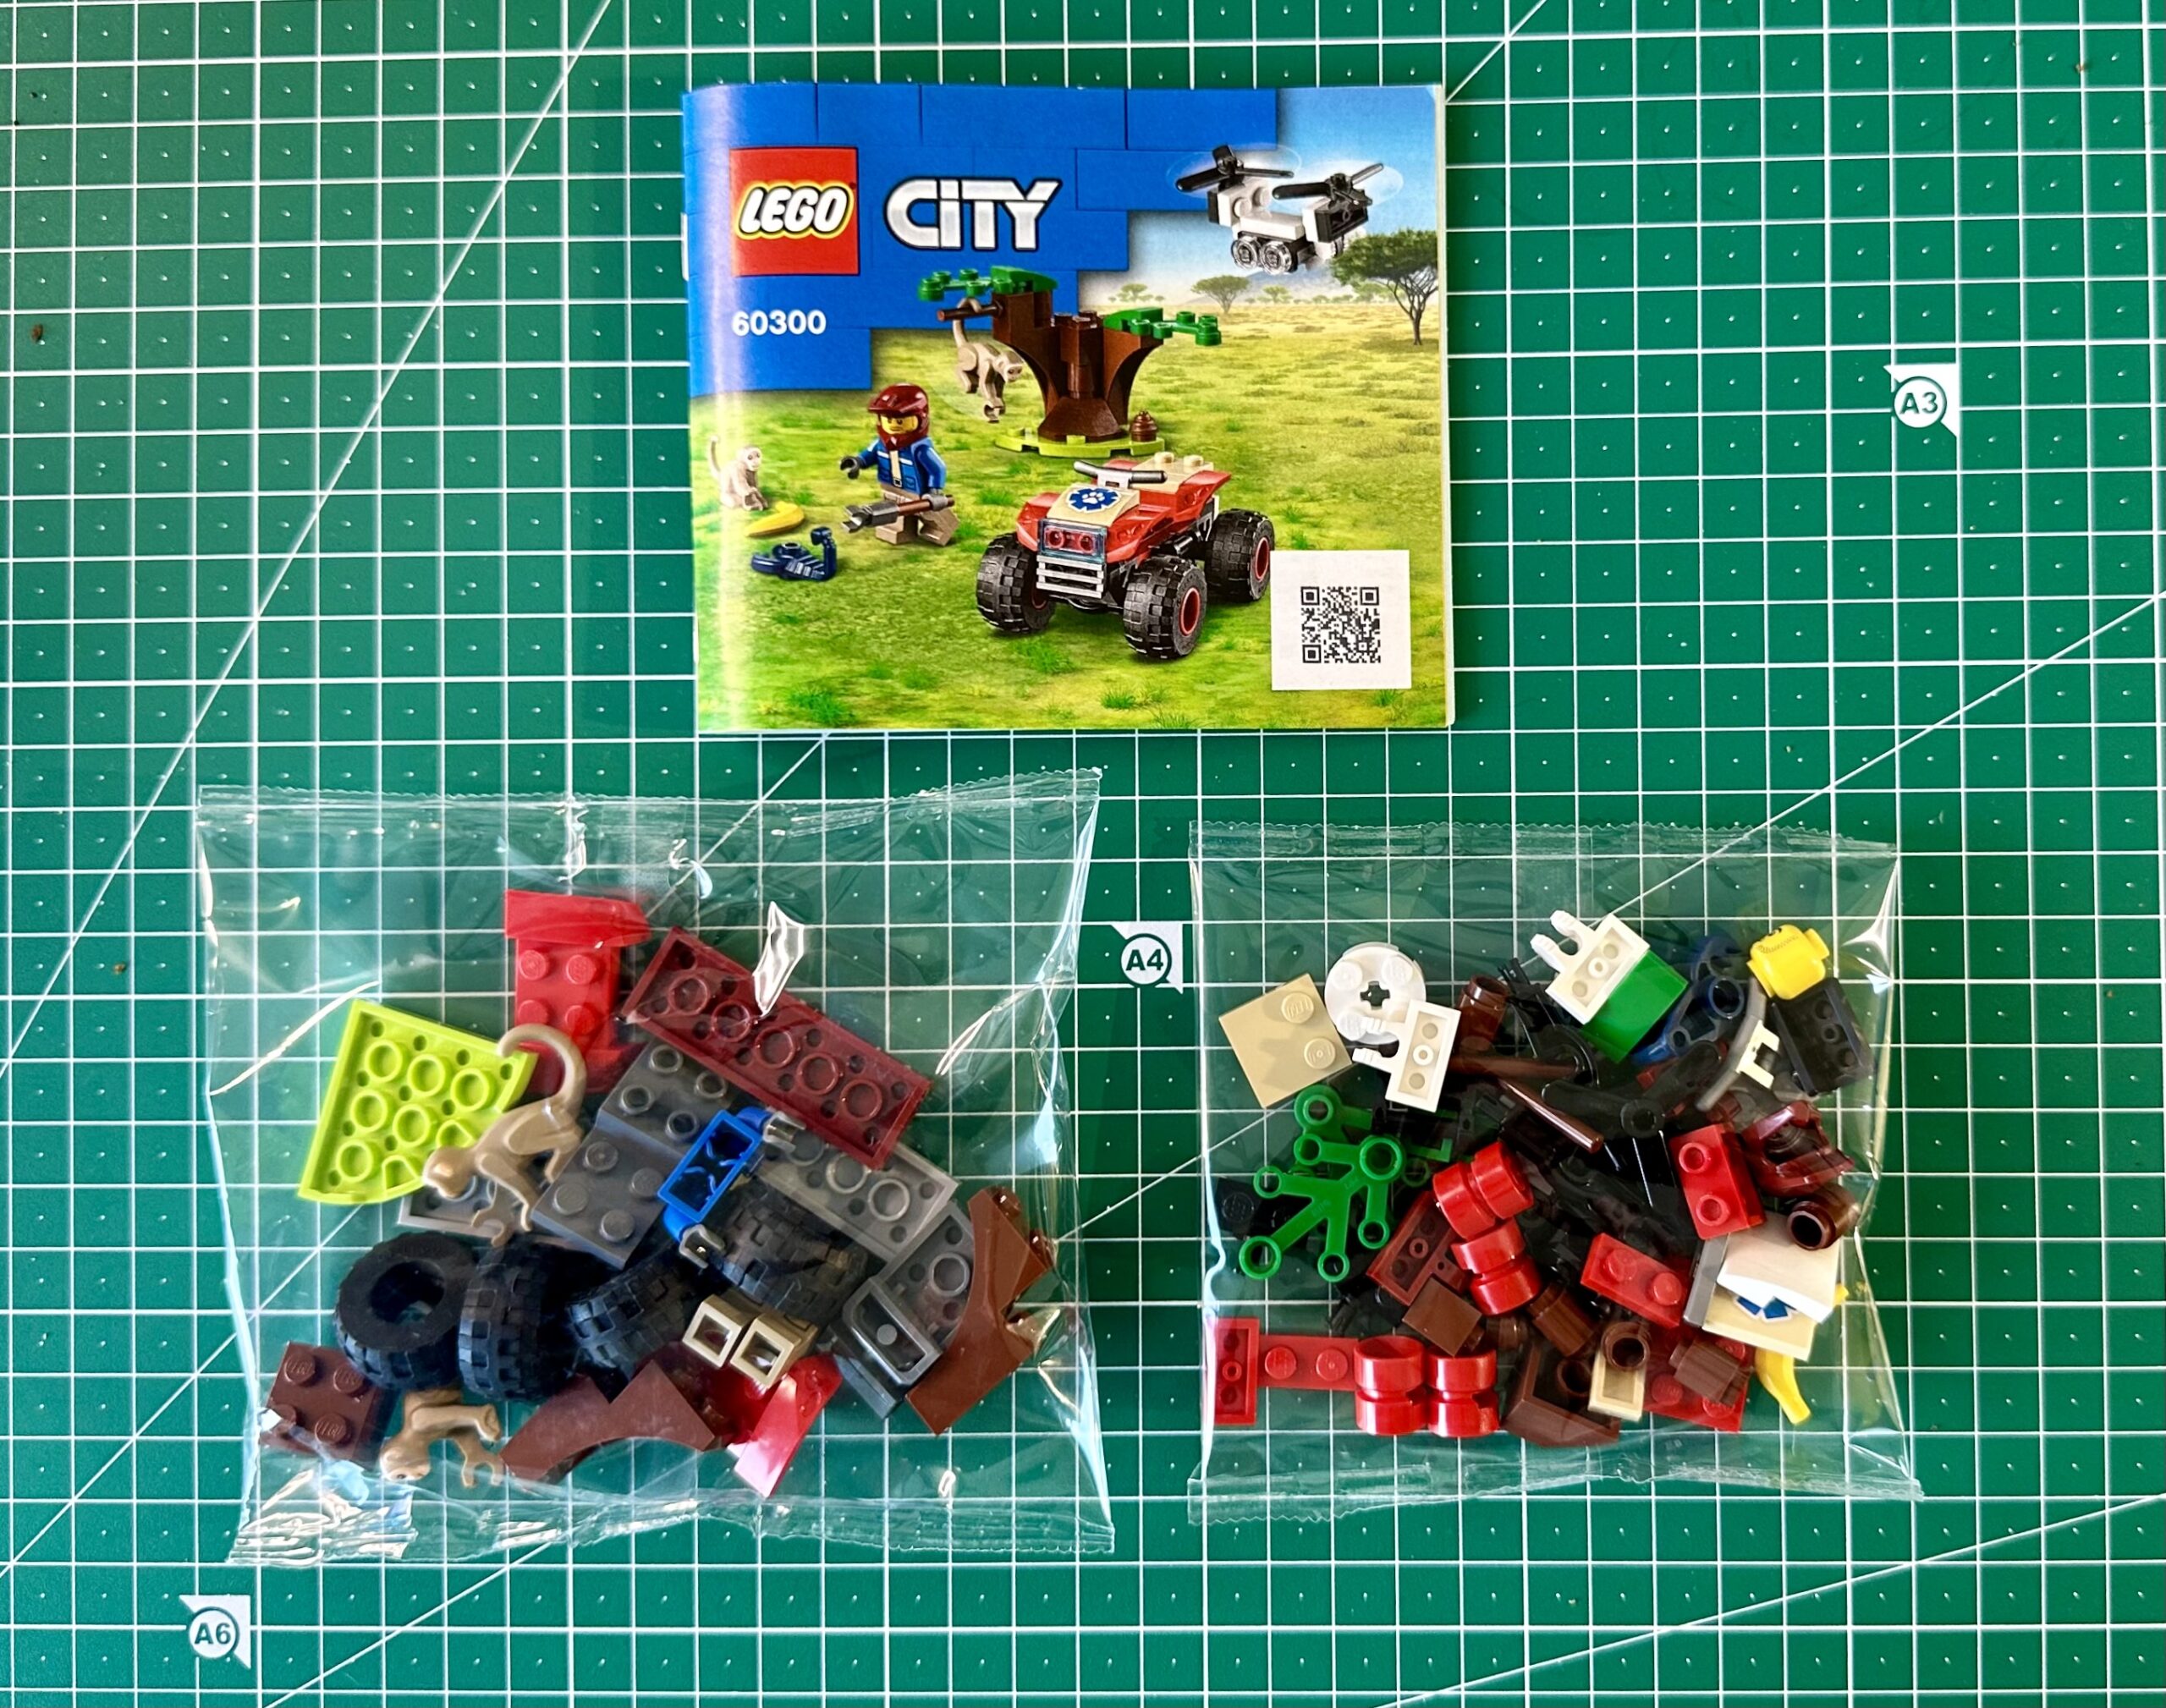 Instruction manual and two bags of LEGO pieces for LEGO City set 60300.